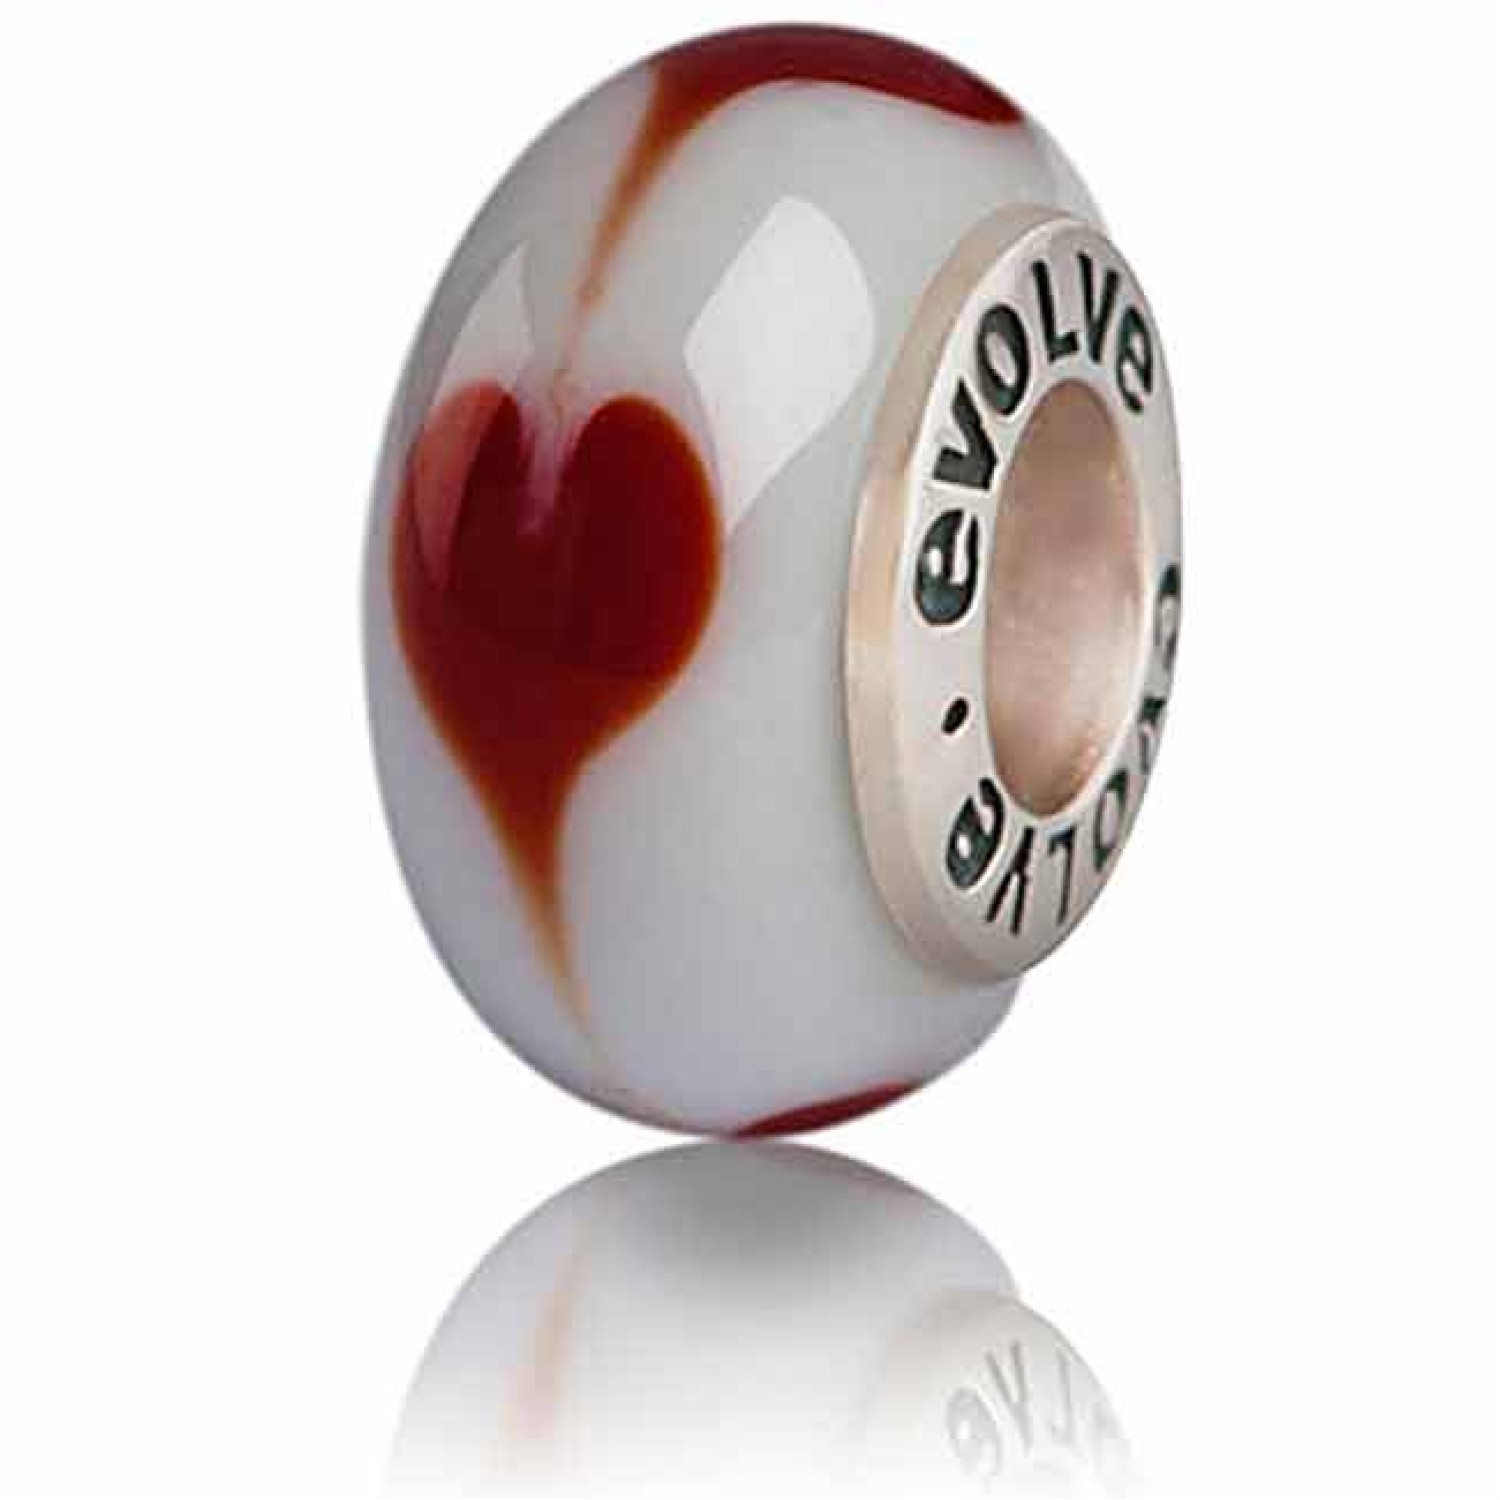 E14 Evolve Charm Aroha - To Love. Evolve New Zealand Aroha To Love Charms. Our Places, Our Memories  Design inspiration: Maori word for love - represented by the vibrant red heart. A perfect Valentines Gift	Oxipay is simply the easier way to pa @christies